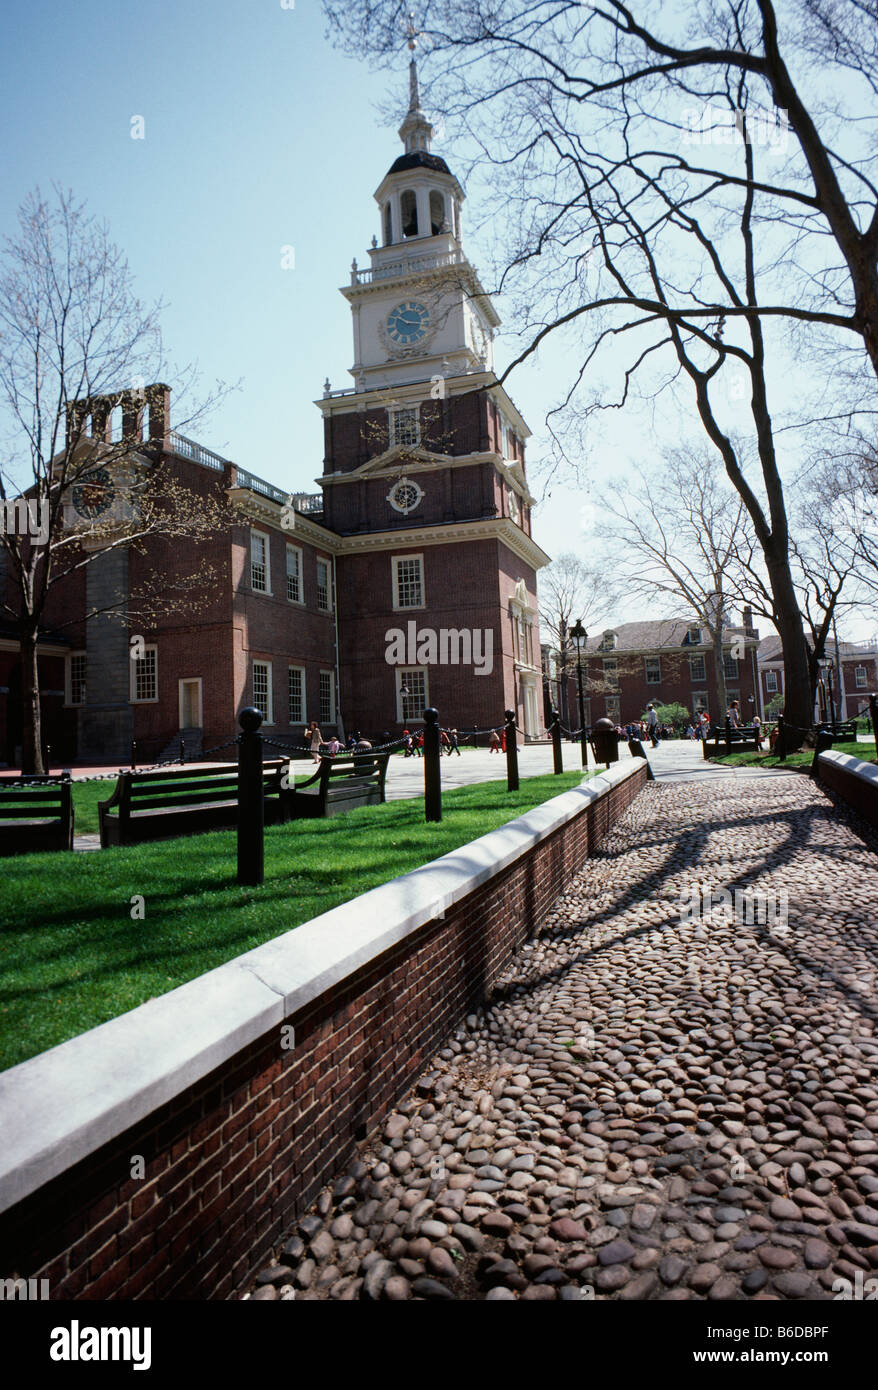 INDEPENDENCE MALL, SITE OF THE SIGNING OF THE DECLARATION OF INDEPENDENCE, 1776, PHILADELPHIA, PENNSYLVANIA, USA Stock Photo